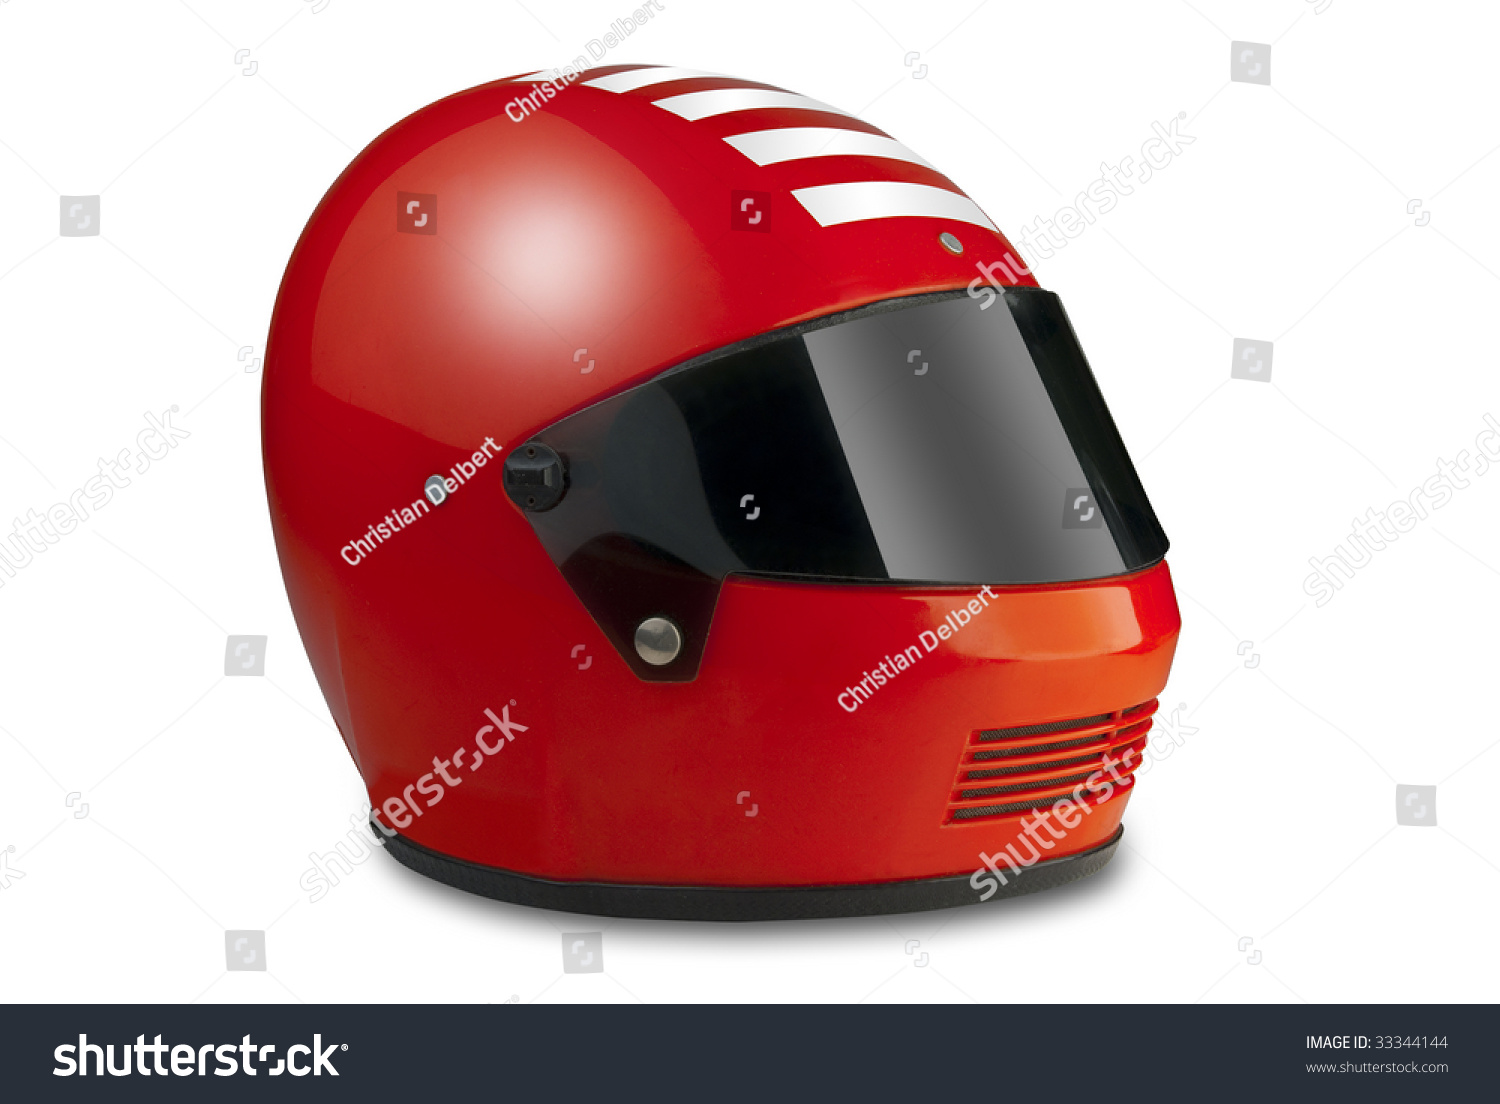 Racing helmet for car or motorcycle with clipping path #33344144